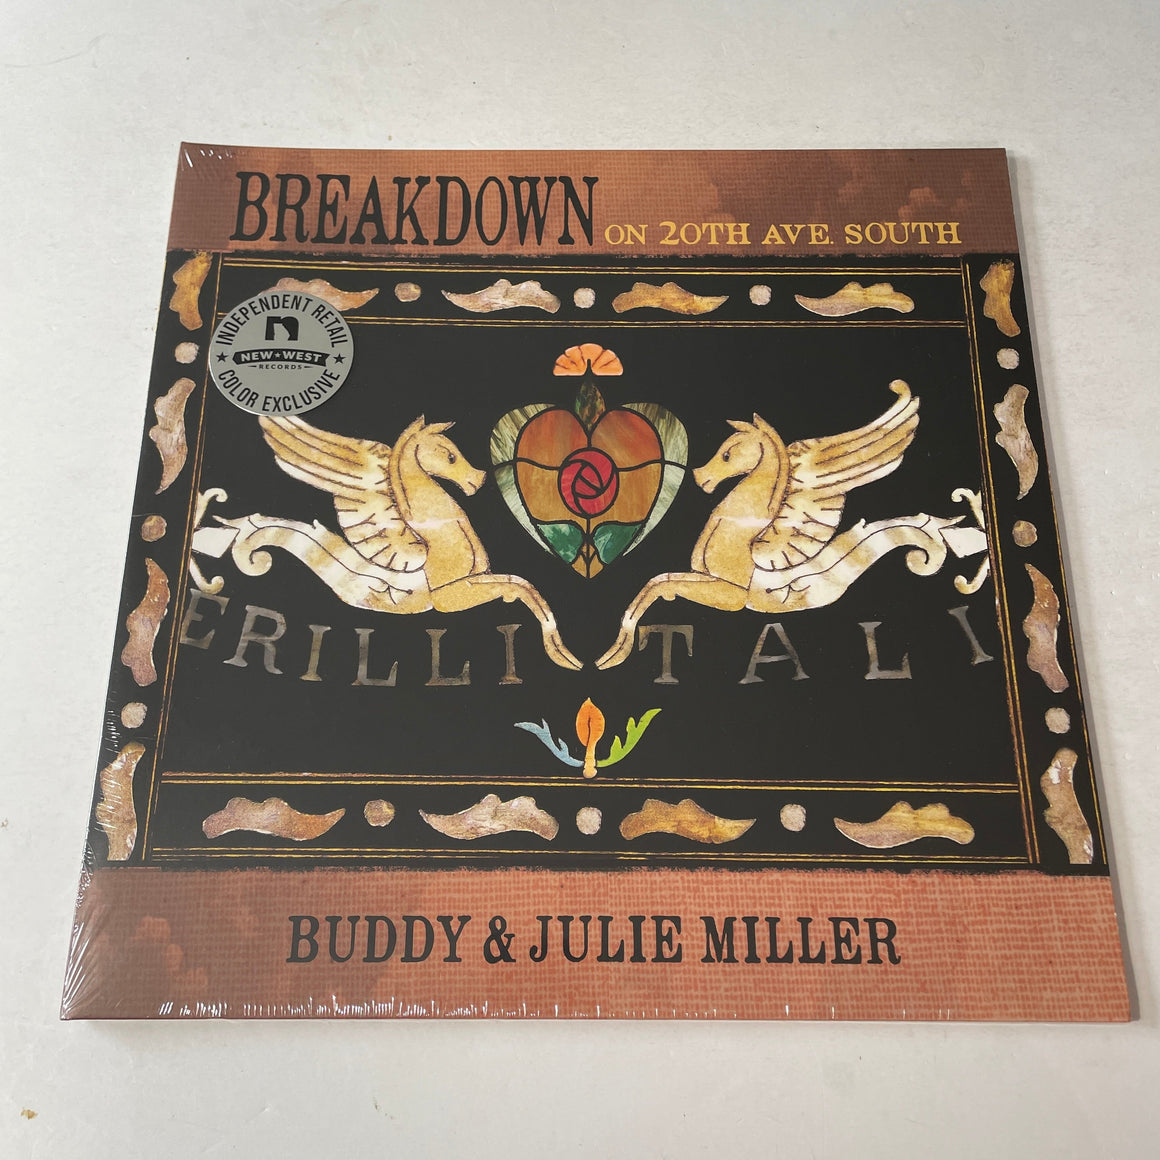 Buddy & Julie Miller Breakdown On 20th Ave. South New Colored Vinyl LP M\M